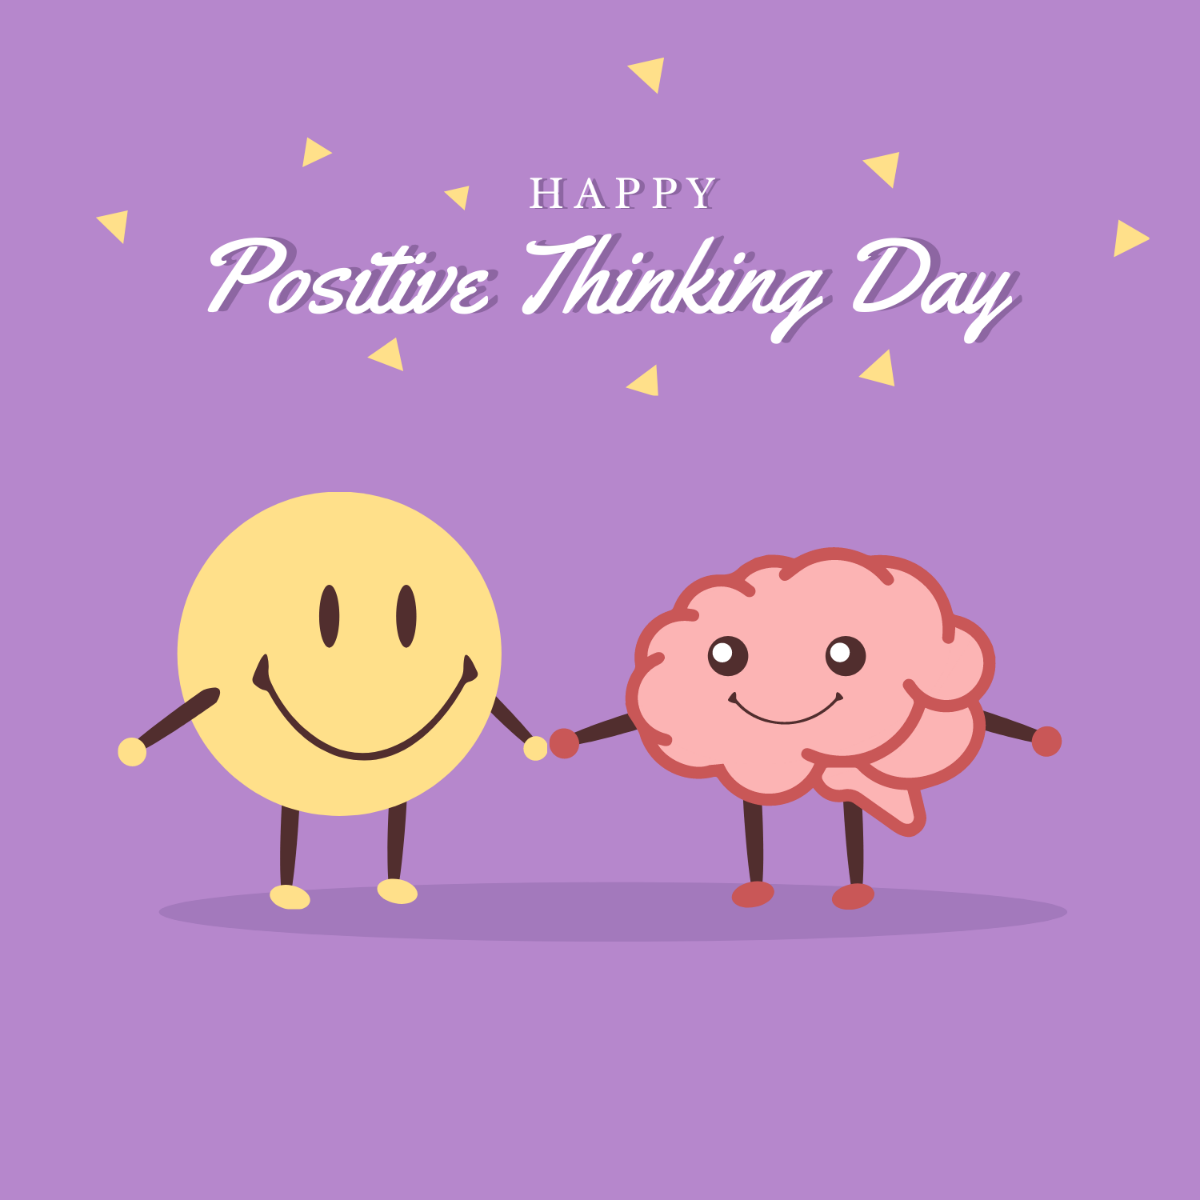 Positive Thinking Day Greeting Card Vector Template